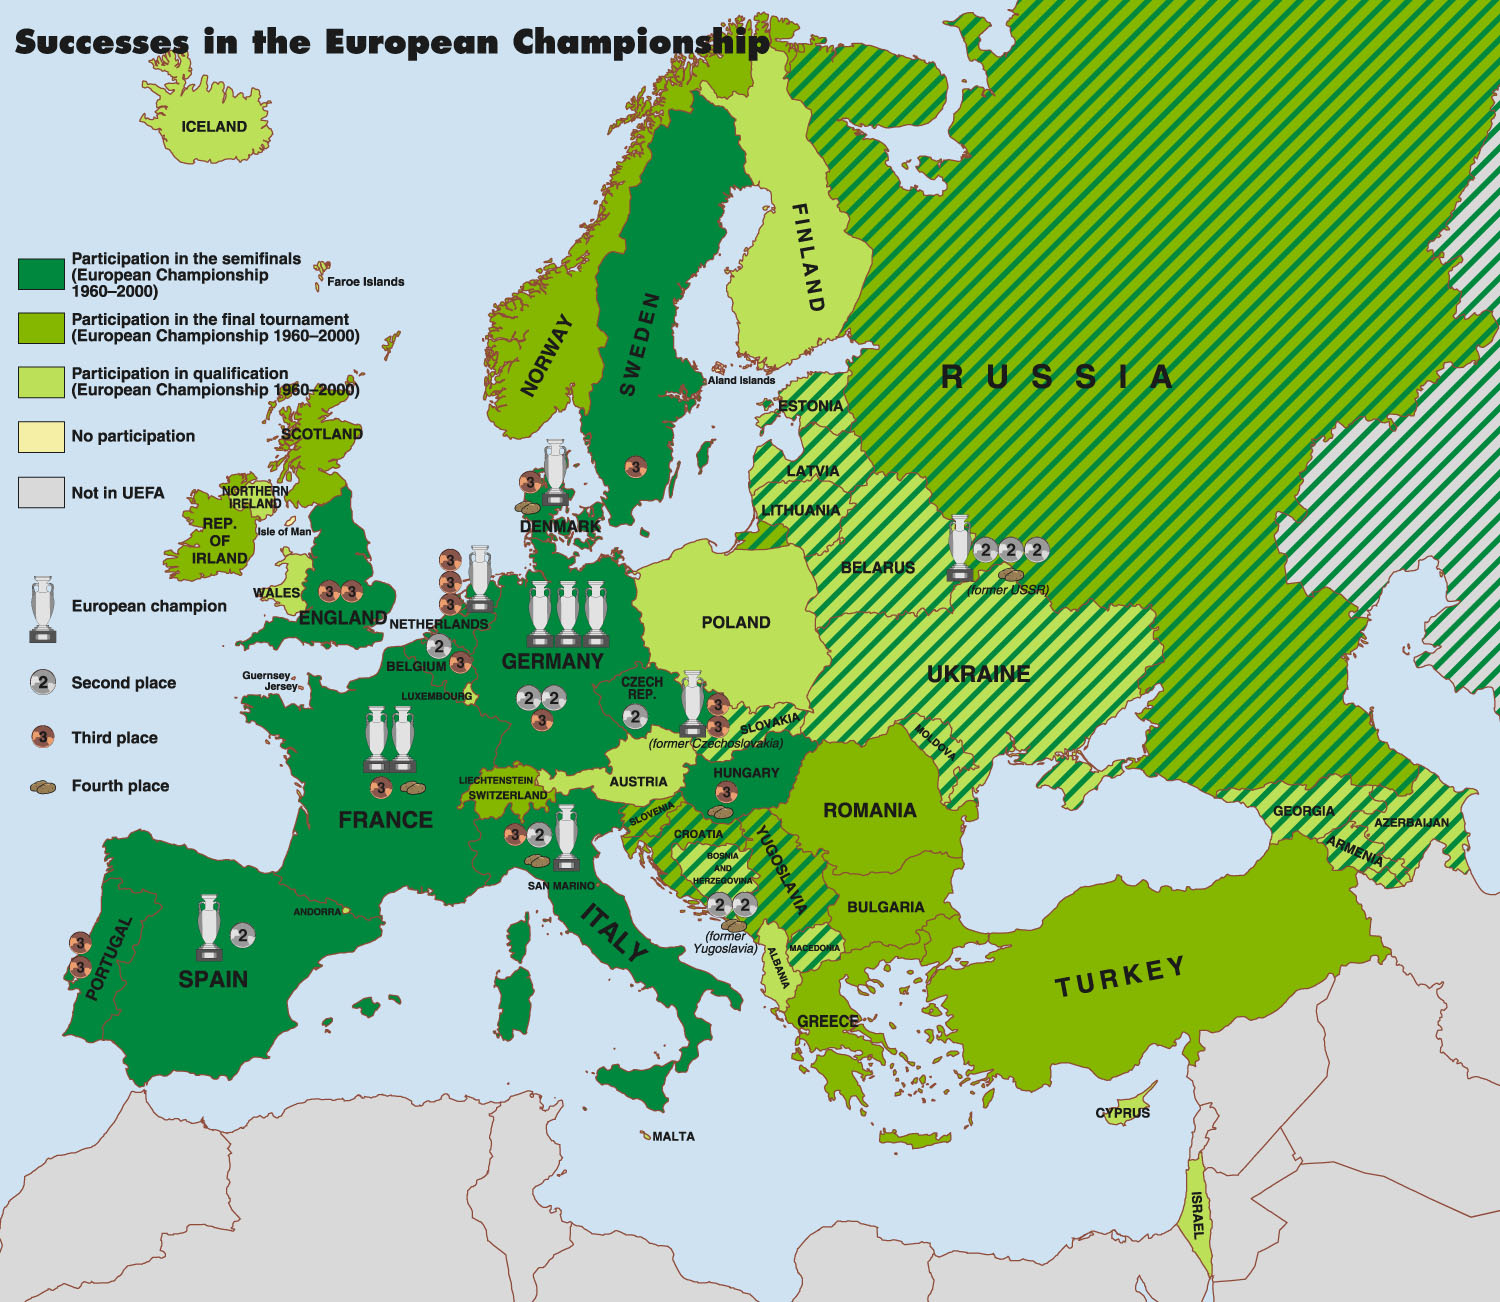 Successes in the European Championship - whole map